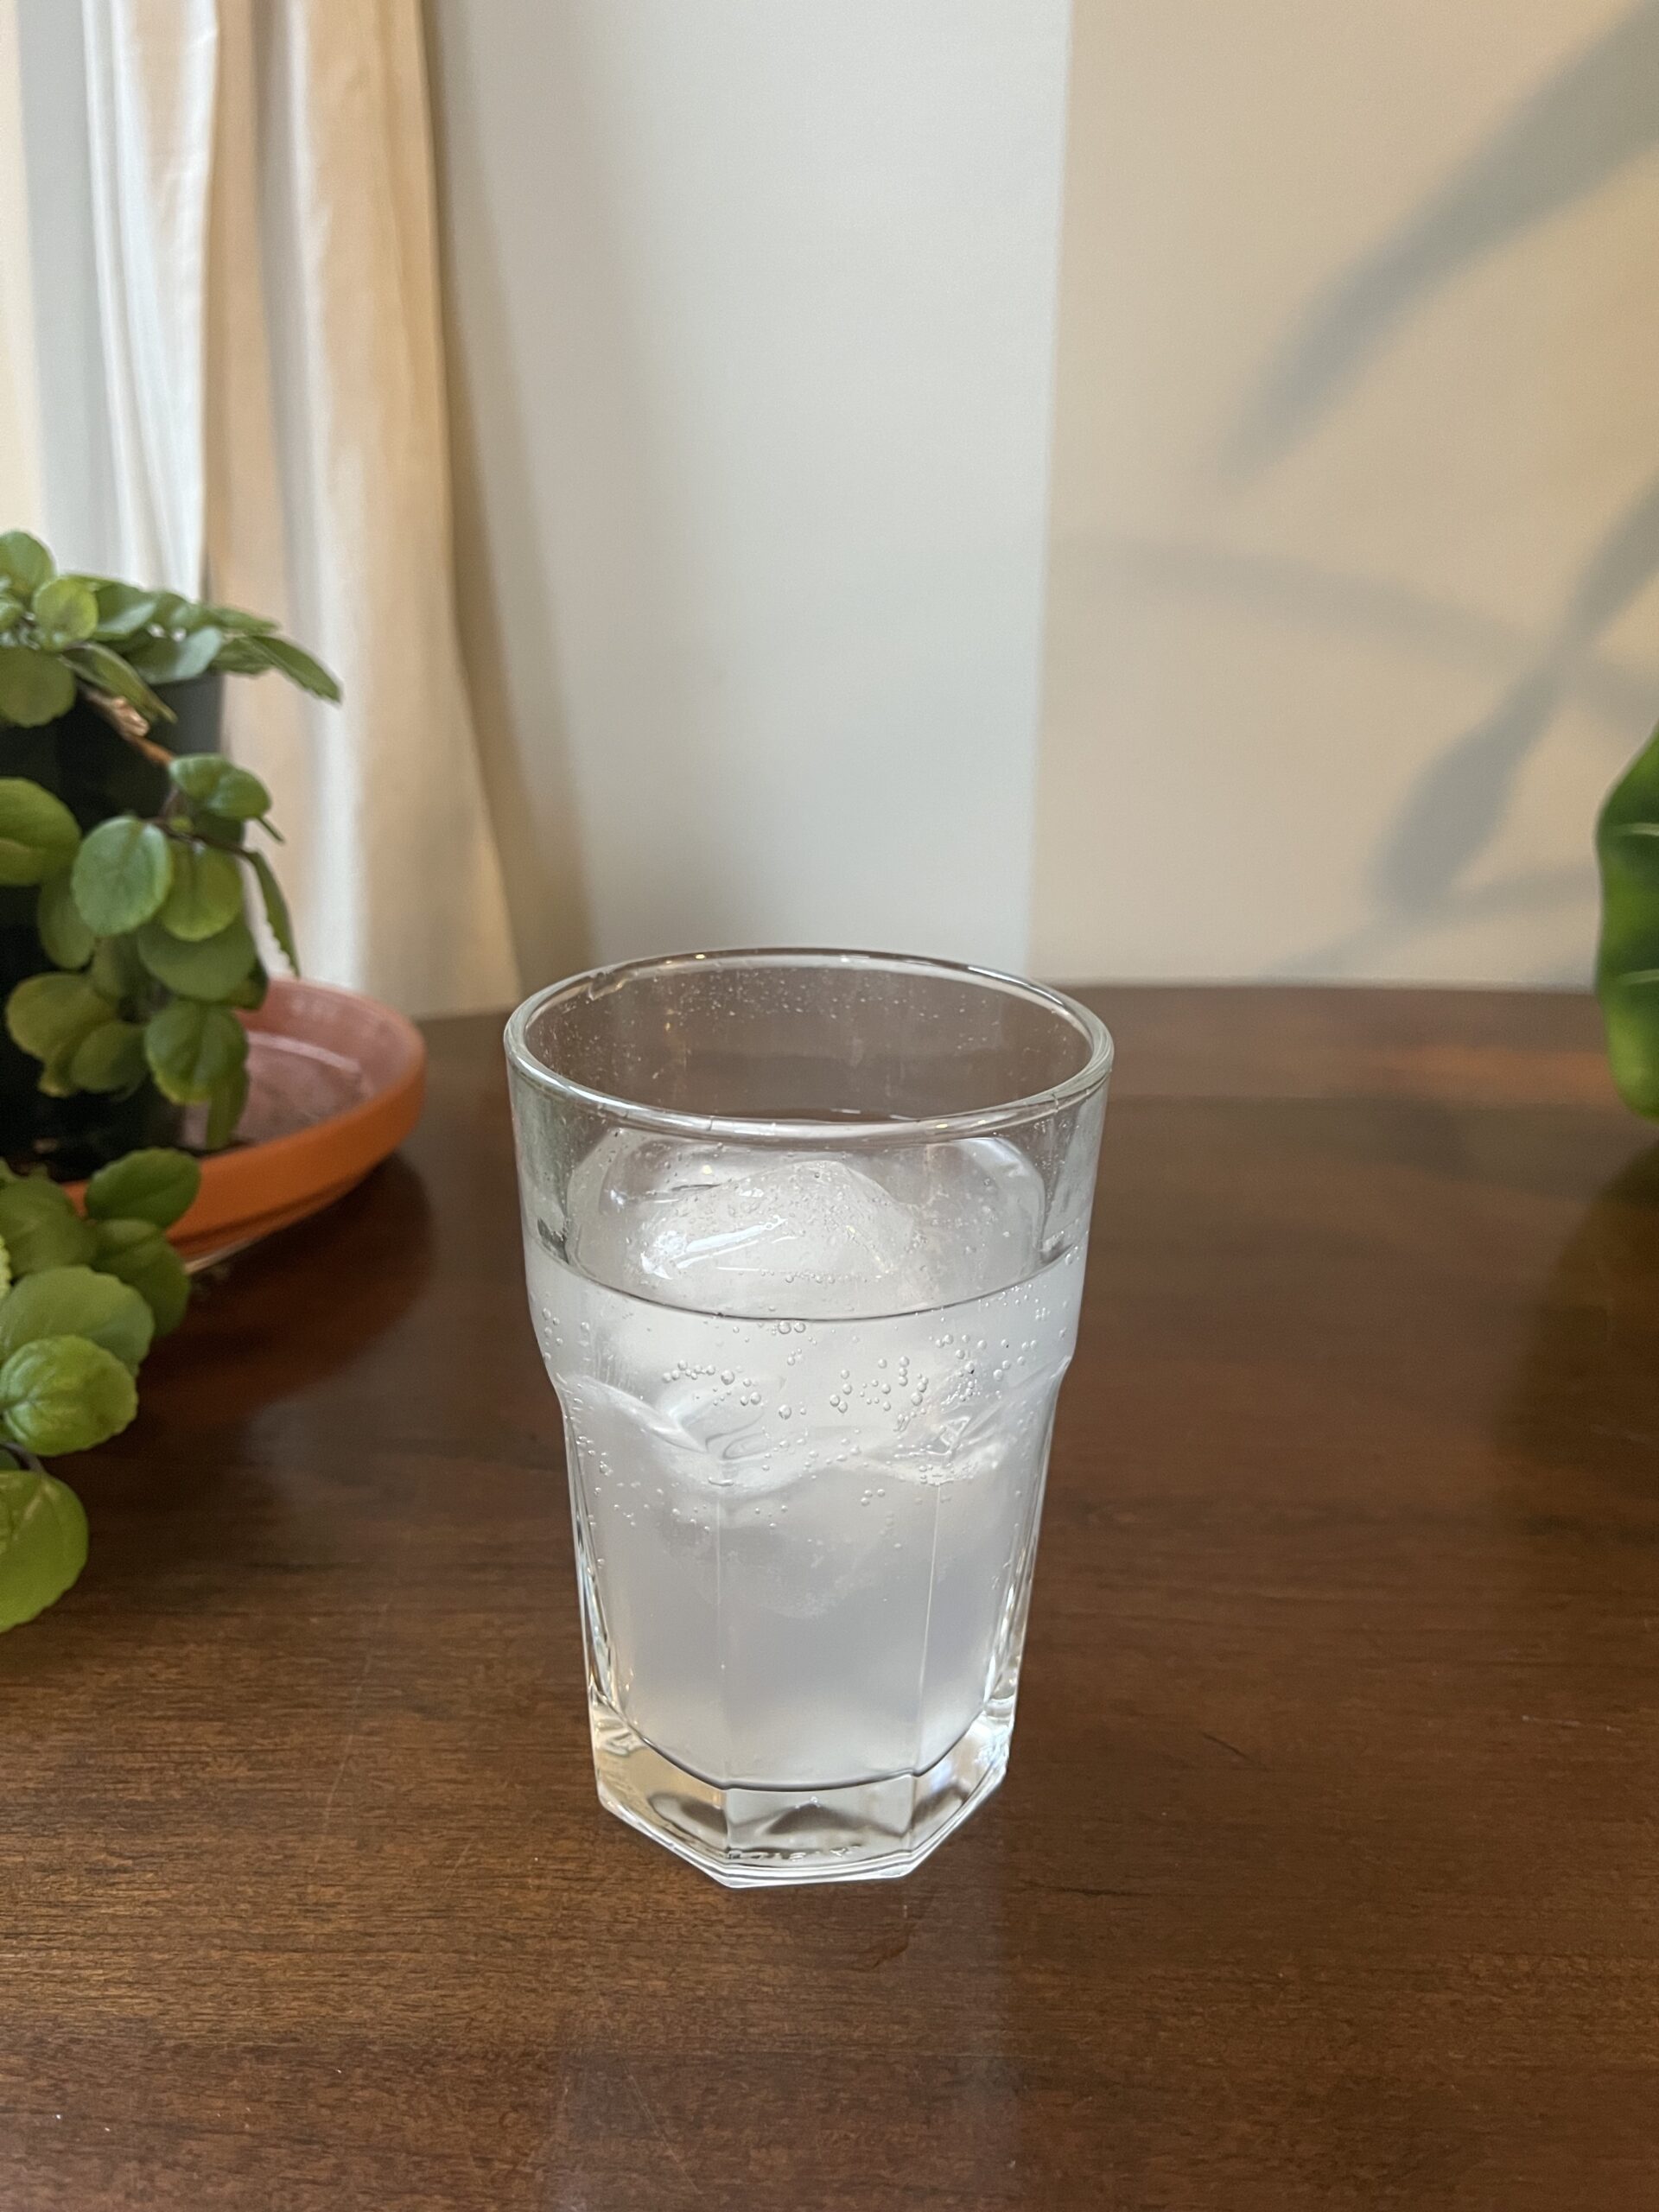 A glass of water with ice sits on a wooden table, with a potted plant in the background.